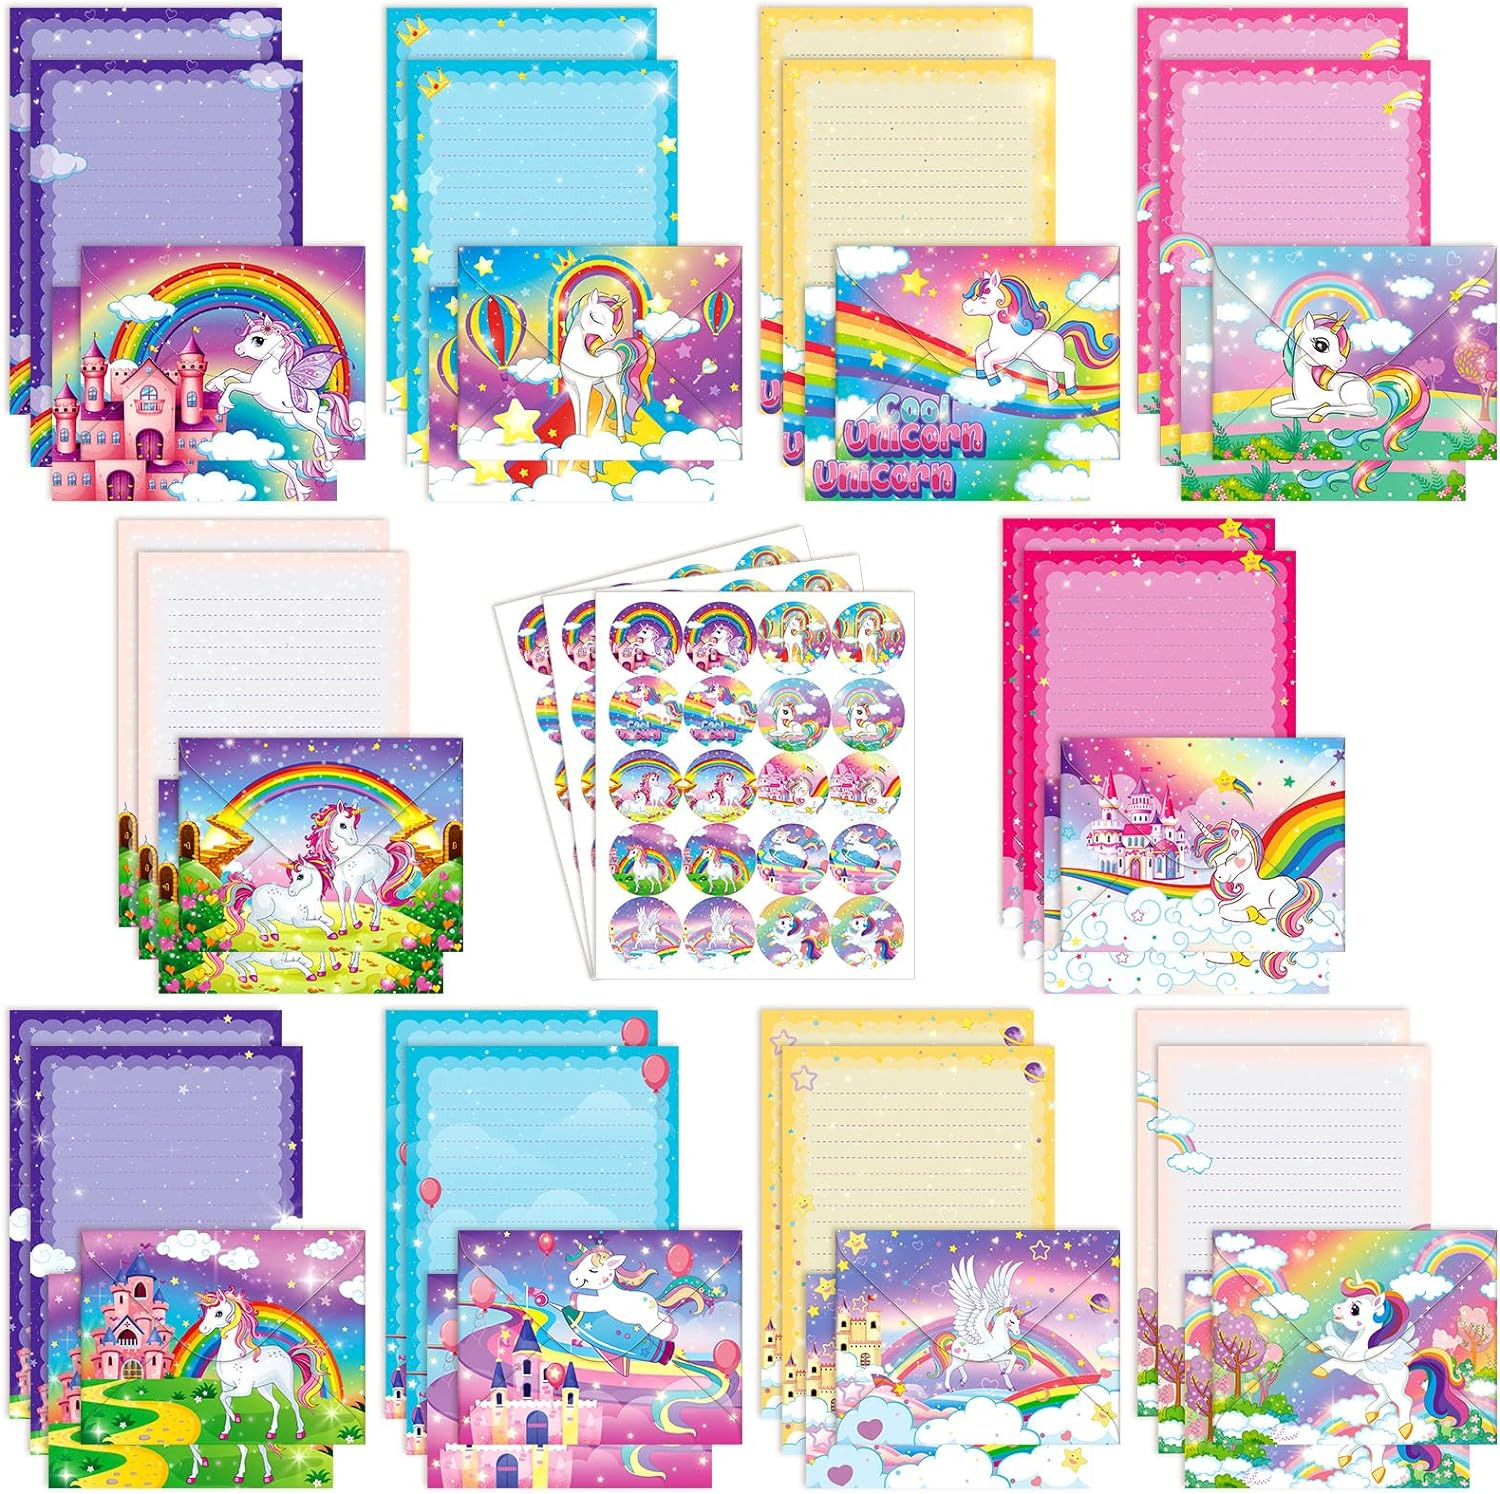 160 Packs Stationery Paper Set (50 Double Sided Stationery Writing Papers 50 Mat